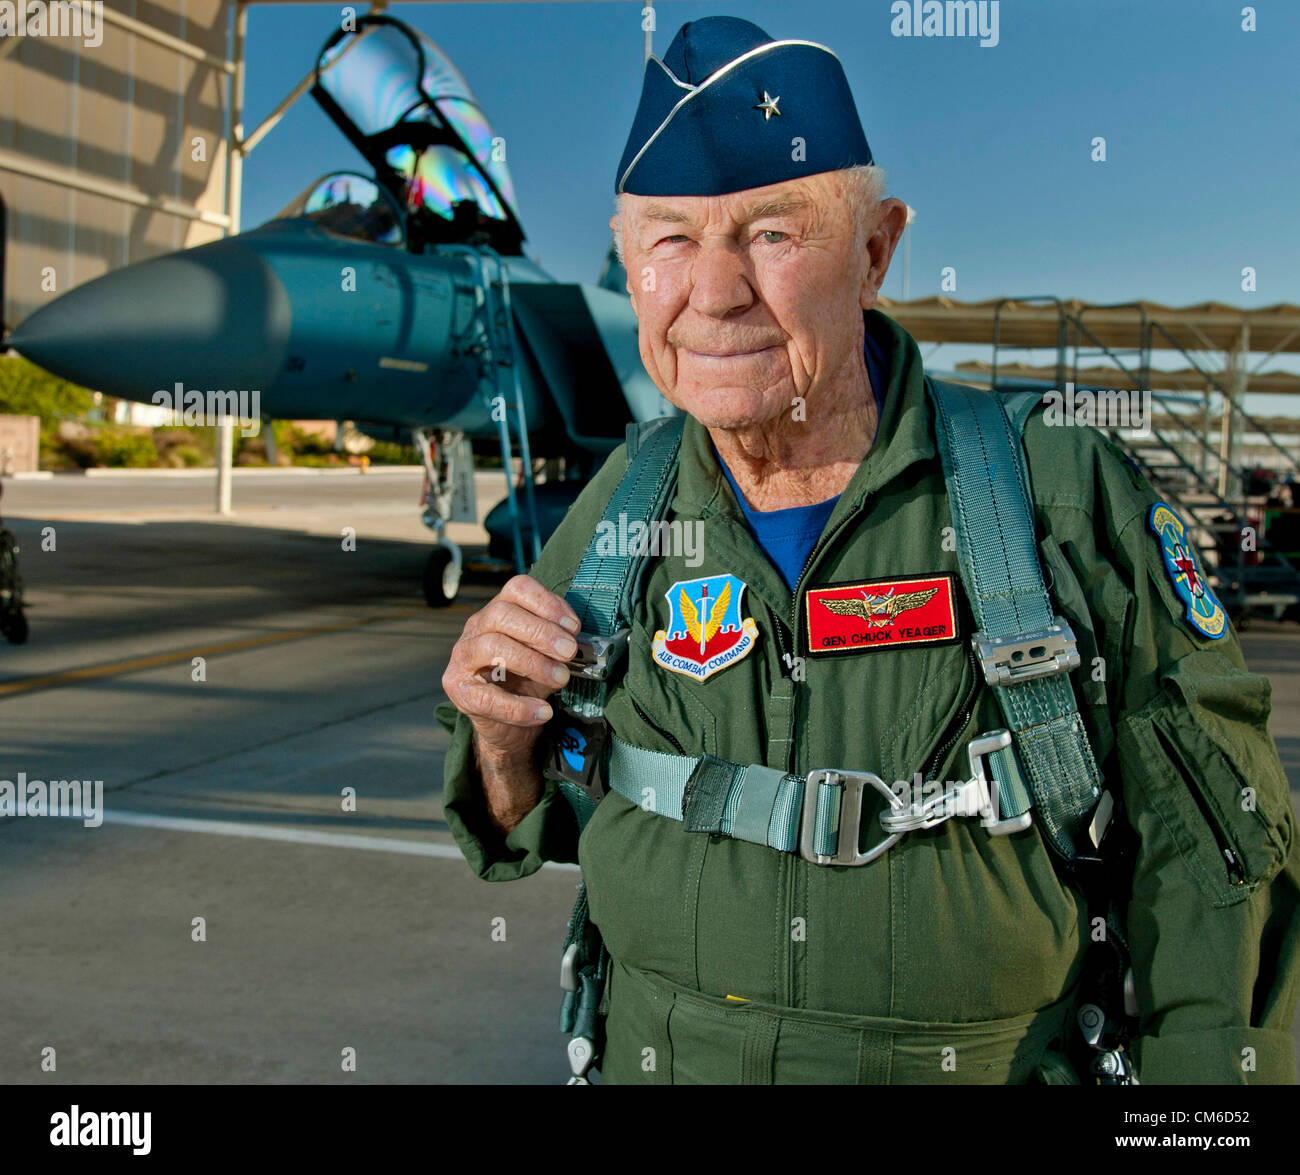 Retired United States Air Force Brig. Gen. Chuck Yeager, 89, smiles before boarding an F-15D Eagle fighter aircraft to celebrate the 65th anniversary of becoming the first person to break the sound barrier October 14, 2012, at Nellis Air Force Base, Nevada. In 1947 Yeager broke the sound barrier in a Bell XS-1 rocket research plane named Glamorous Glennis. Stock Photo